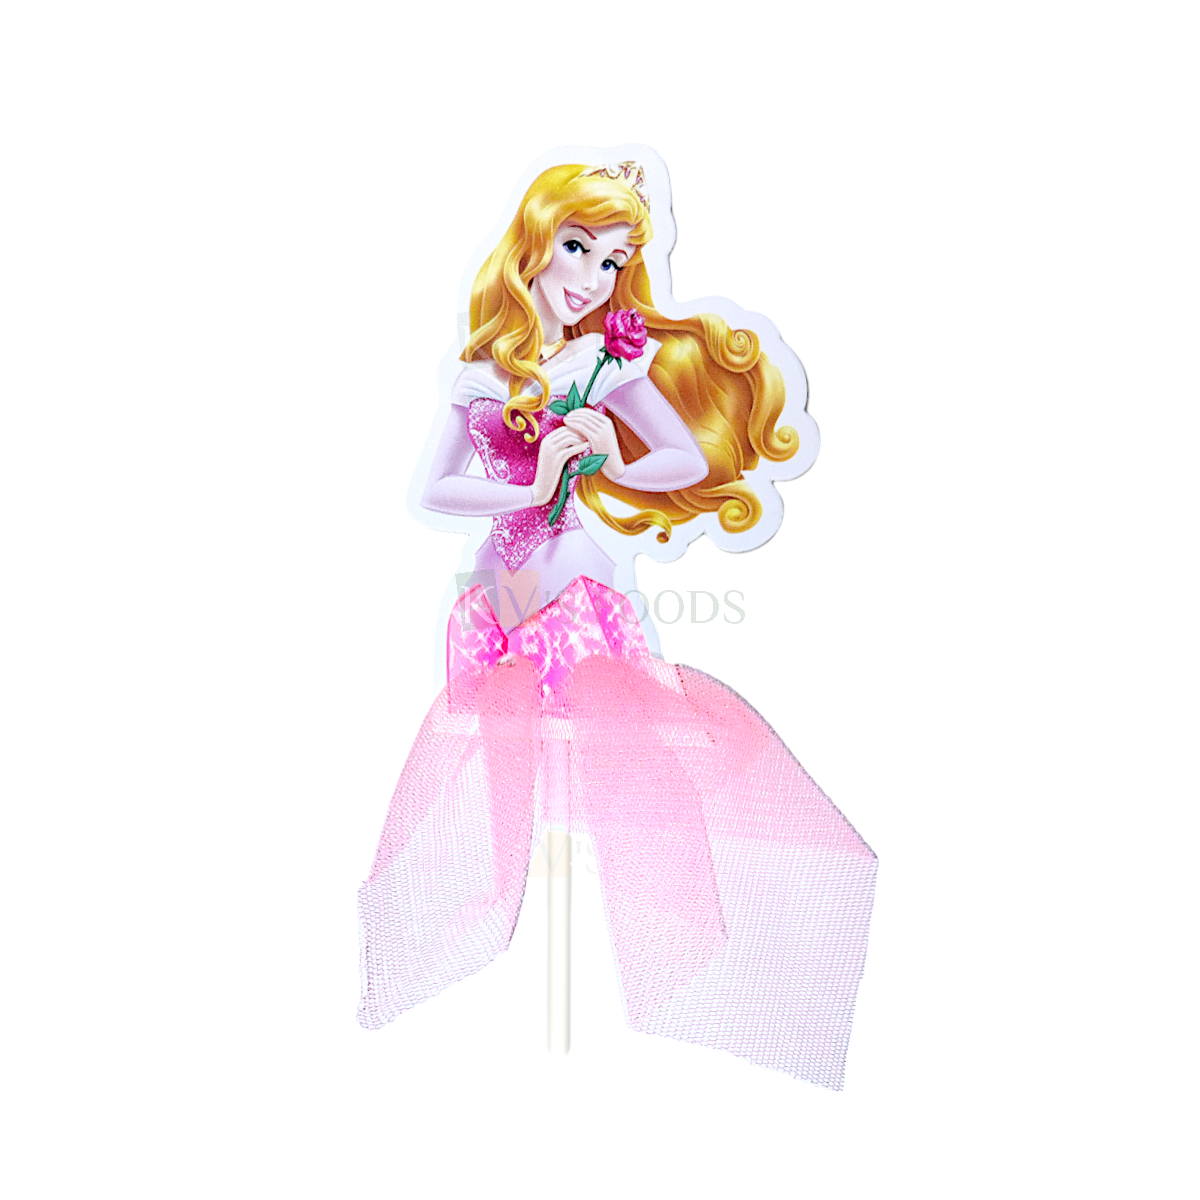 1 PC Pink White Disney Princess Aurora Petite Girl Net Skirt Lady Women Paper Cake Topper for Bride Wedding Mother's Day Women's Day Theme, Pull Me Up Doll Cakes Daughters Birthday DIY Cake Decoration